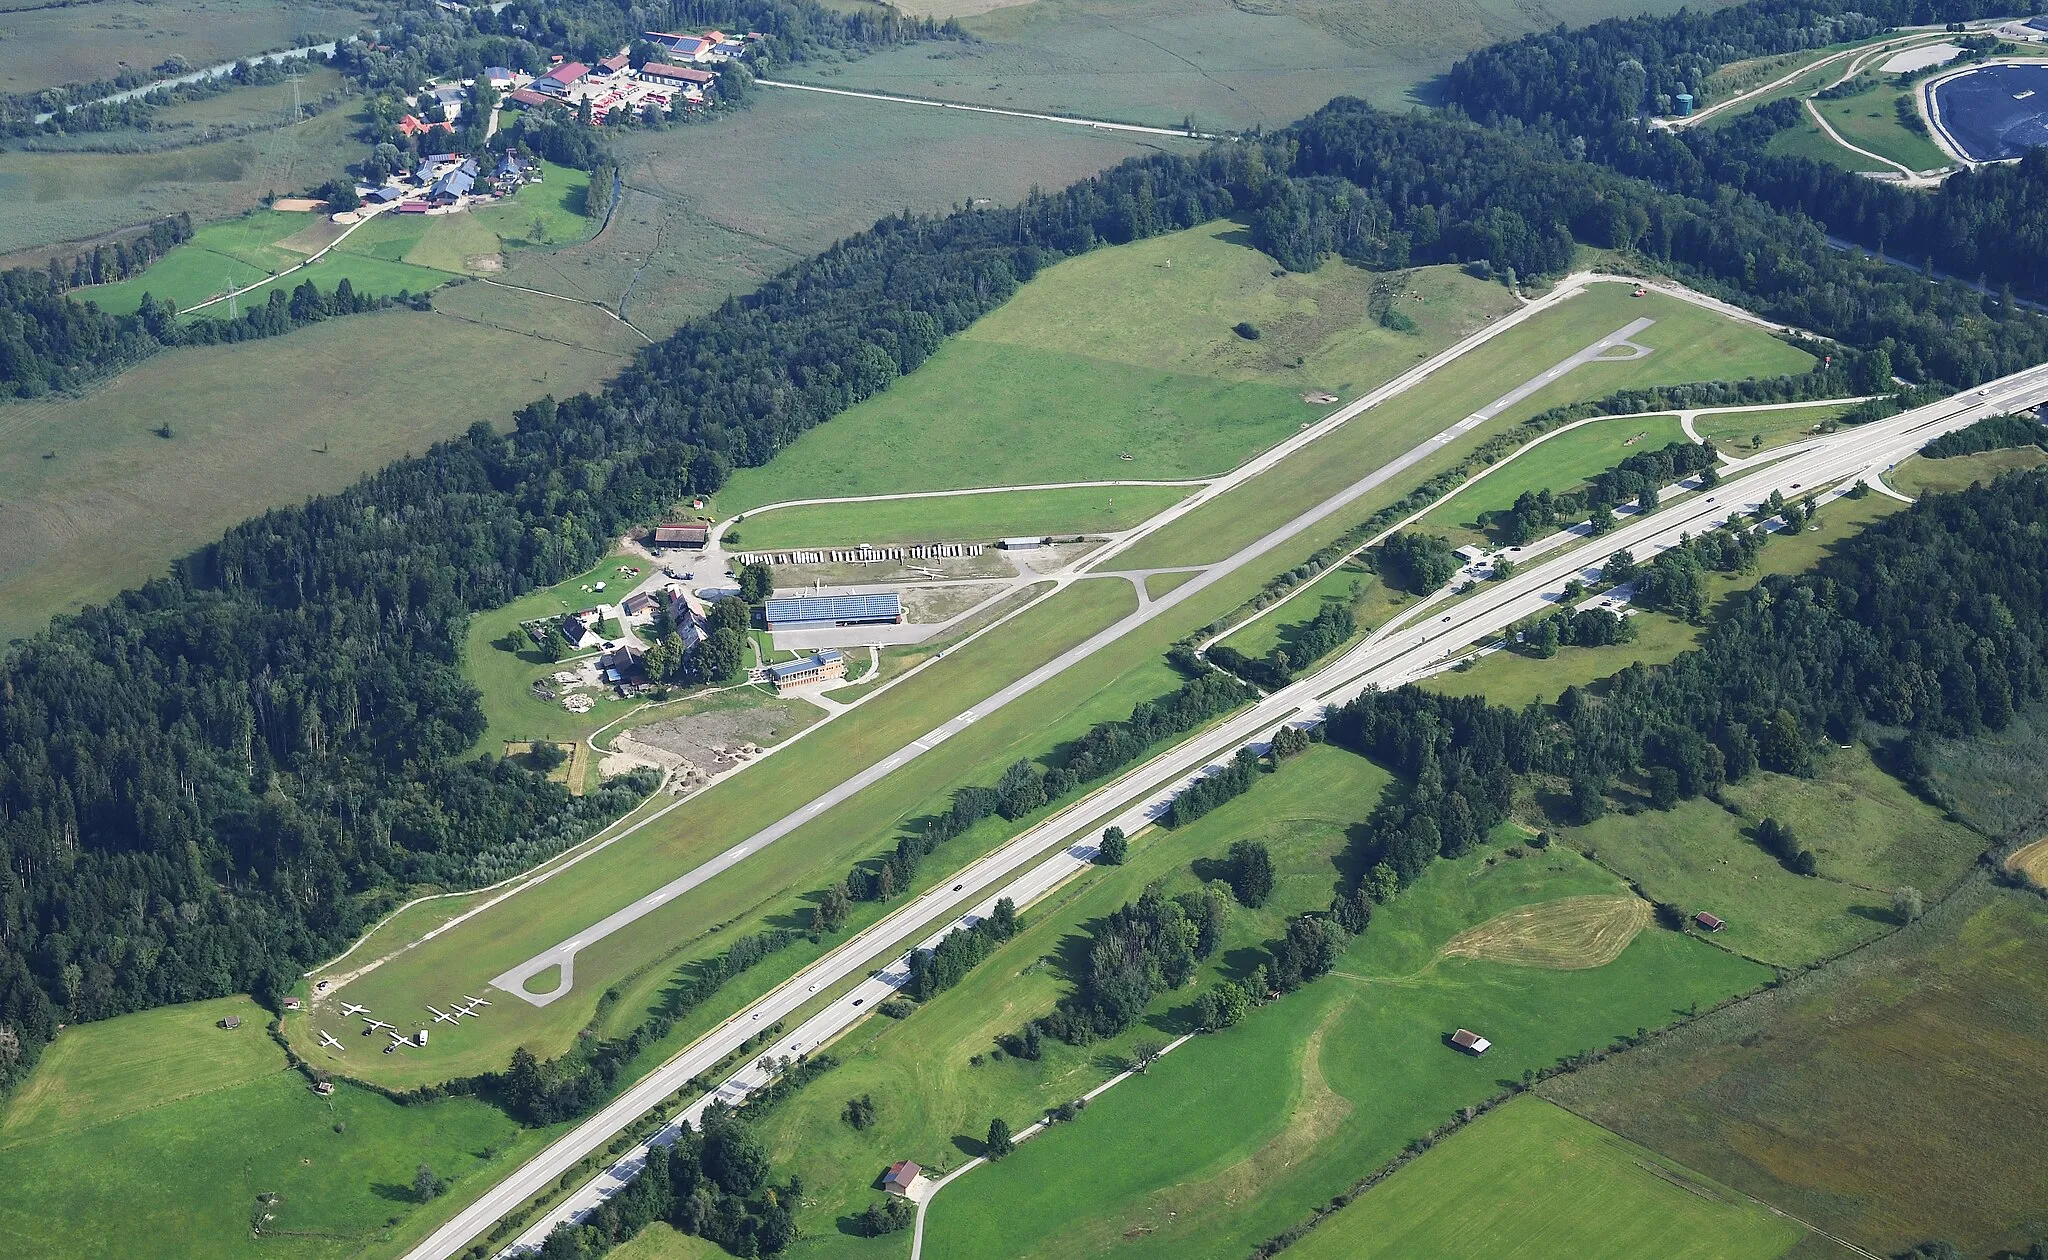 Photo showing: Aerial image of the Ohlstadt gliding site